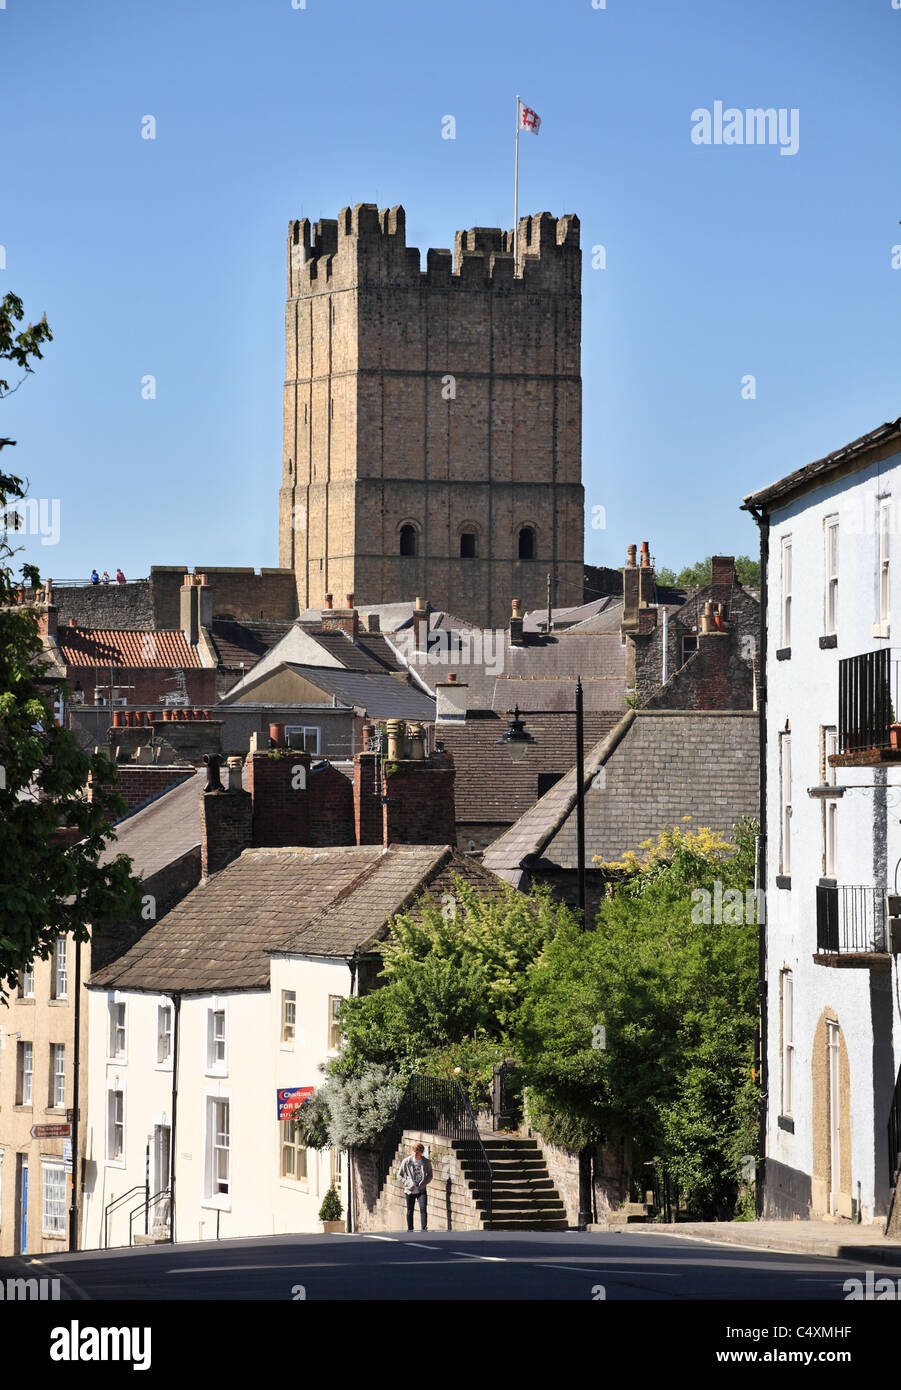 Richmond castle keep towers above houses, North Yorkshire, England, UK Stock Photo